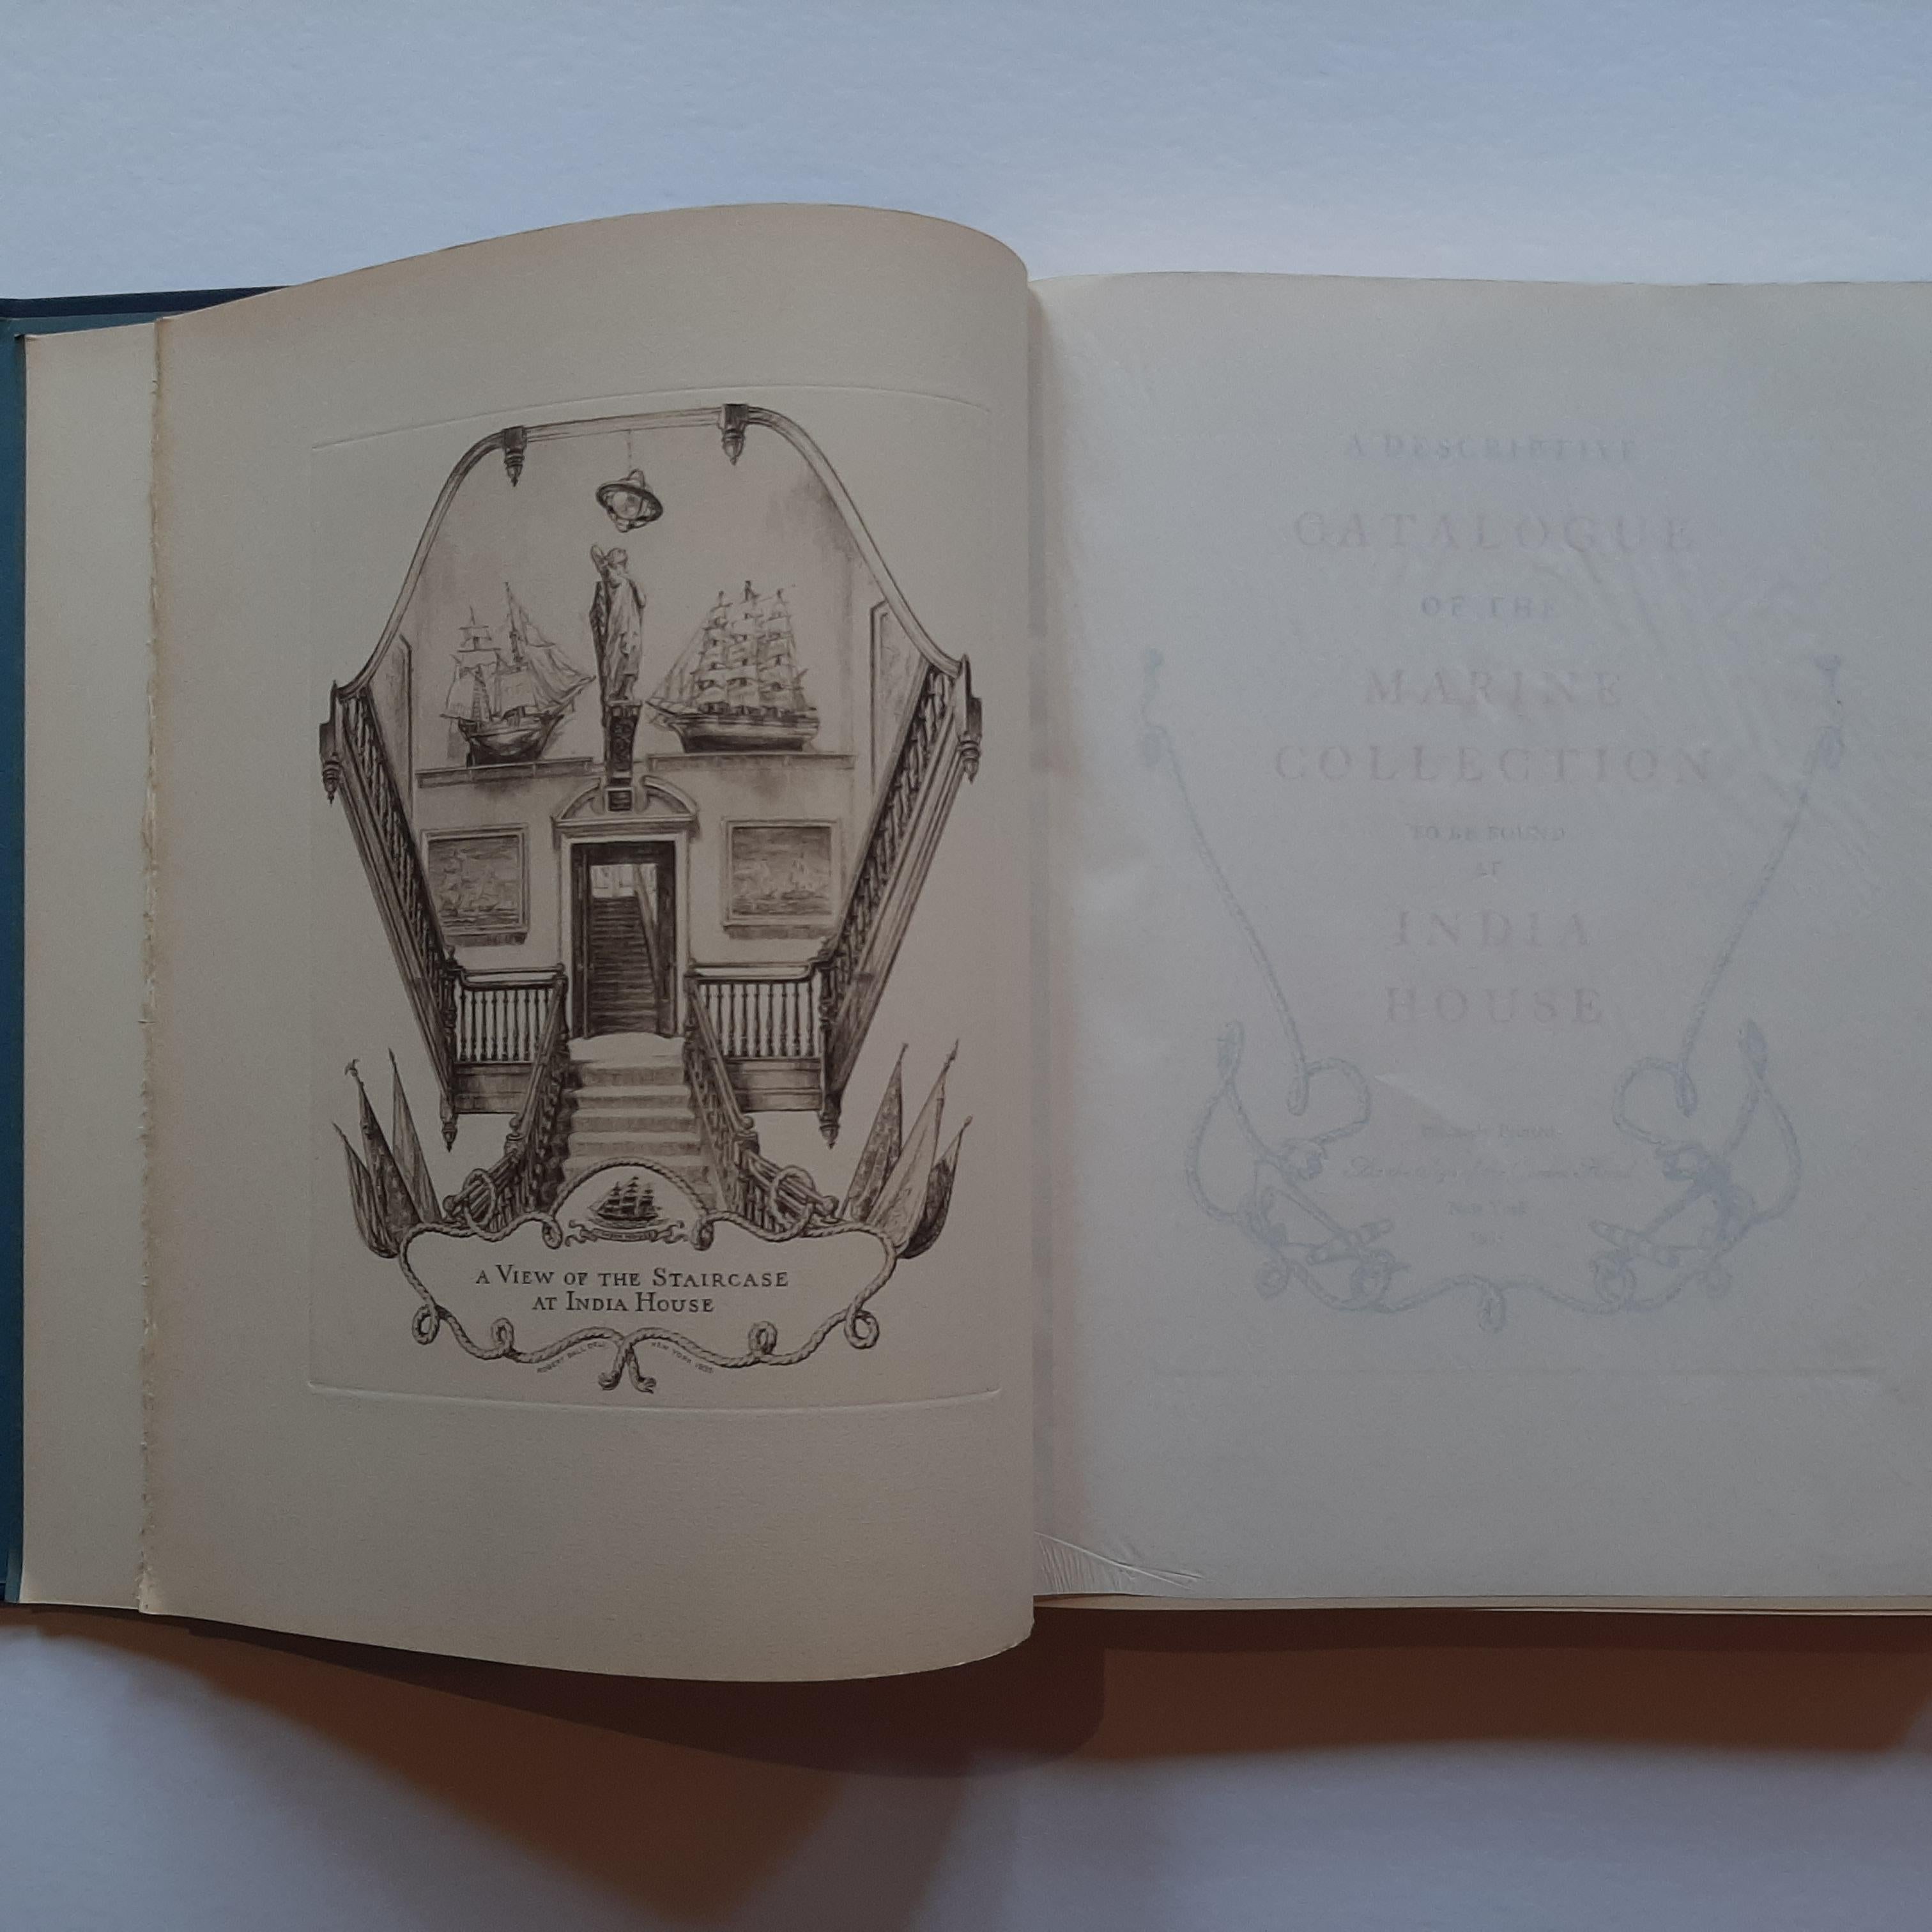 'A Descriptive Catalogue of the Marine Collection to be found at India House'. New York: privately printed at sign of Gosden Head, 1935. First edition. Hardcover. Small folio, bound in full navy blue cloth covered boards. Numerous high quality